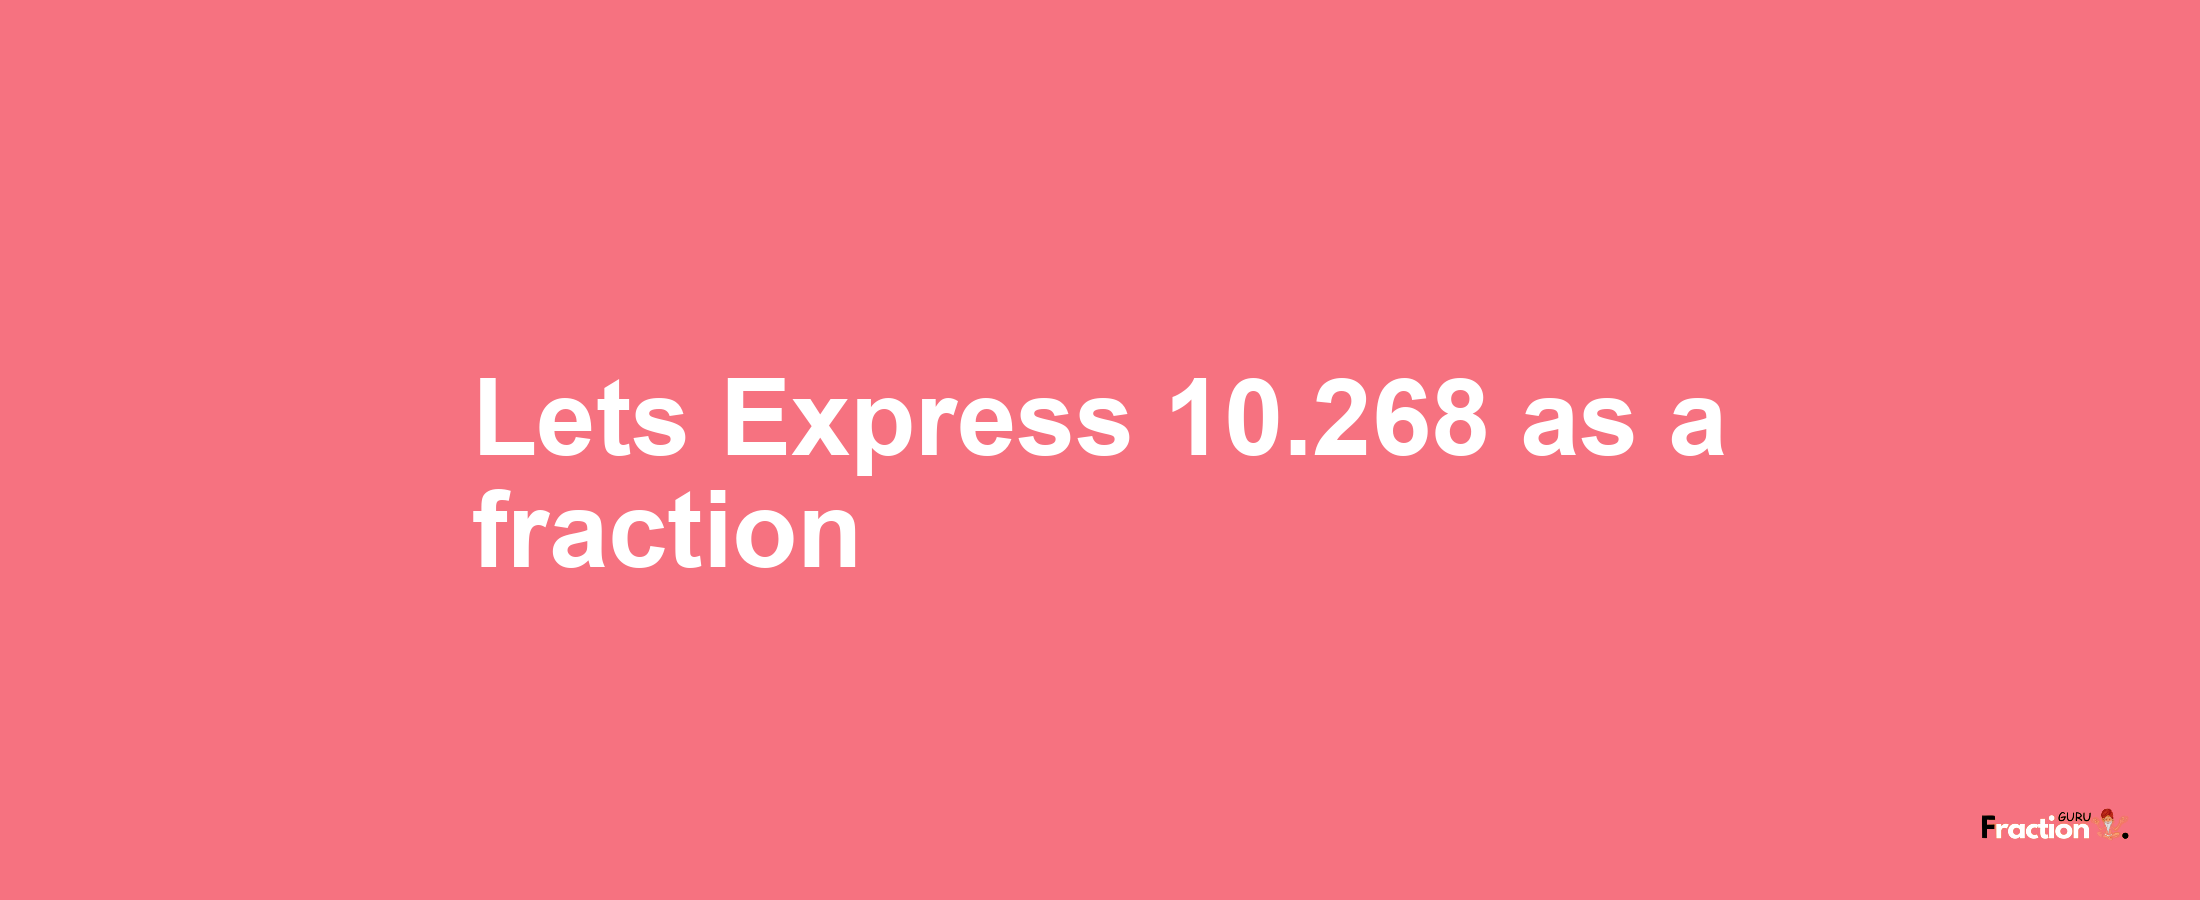 Lets Express 10.268 as afraction